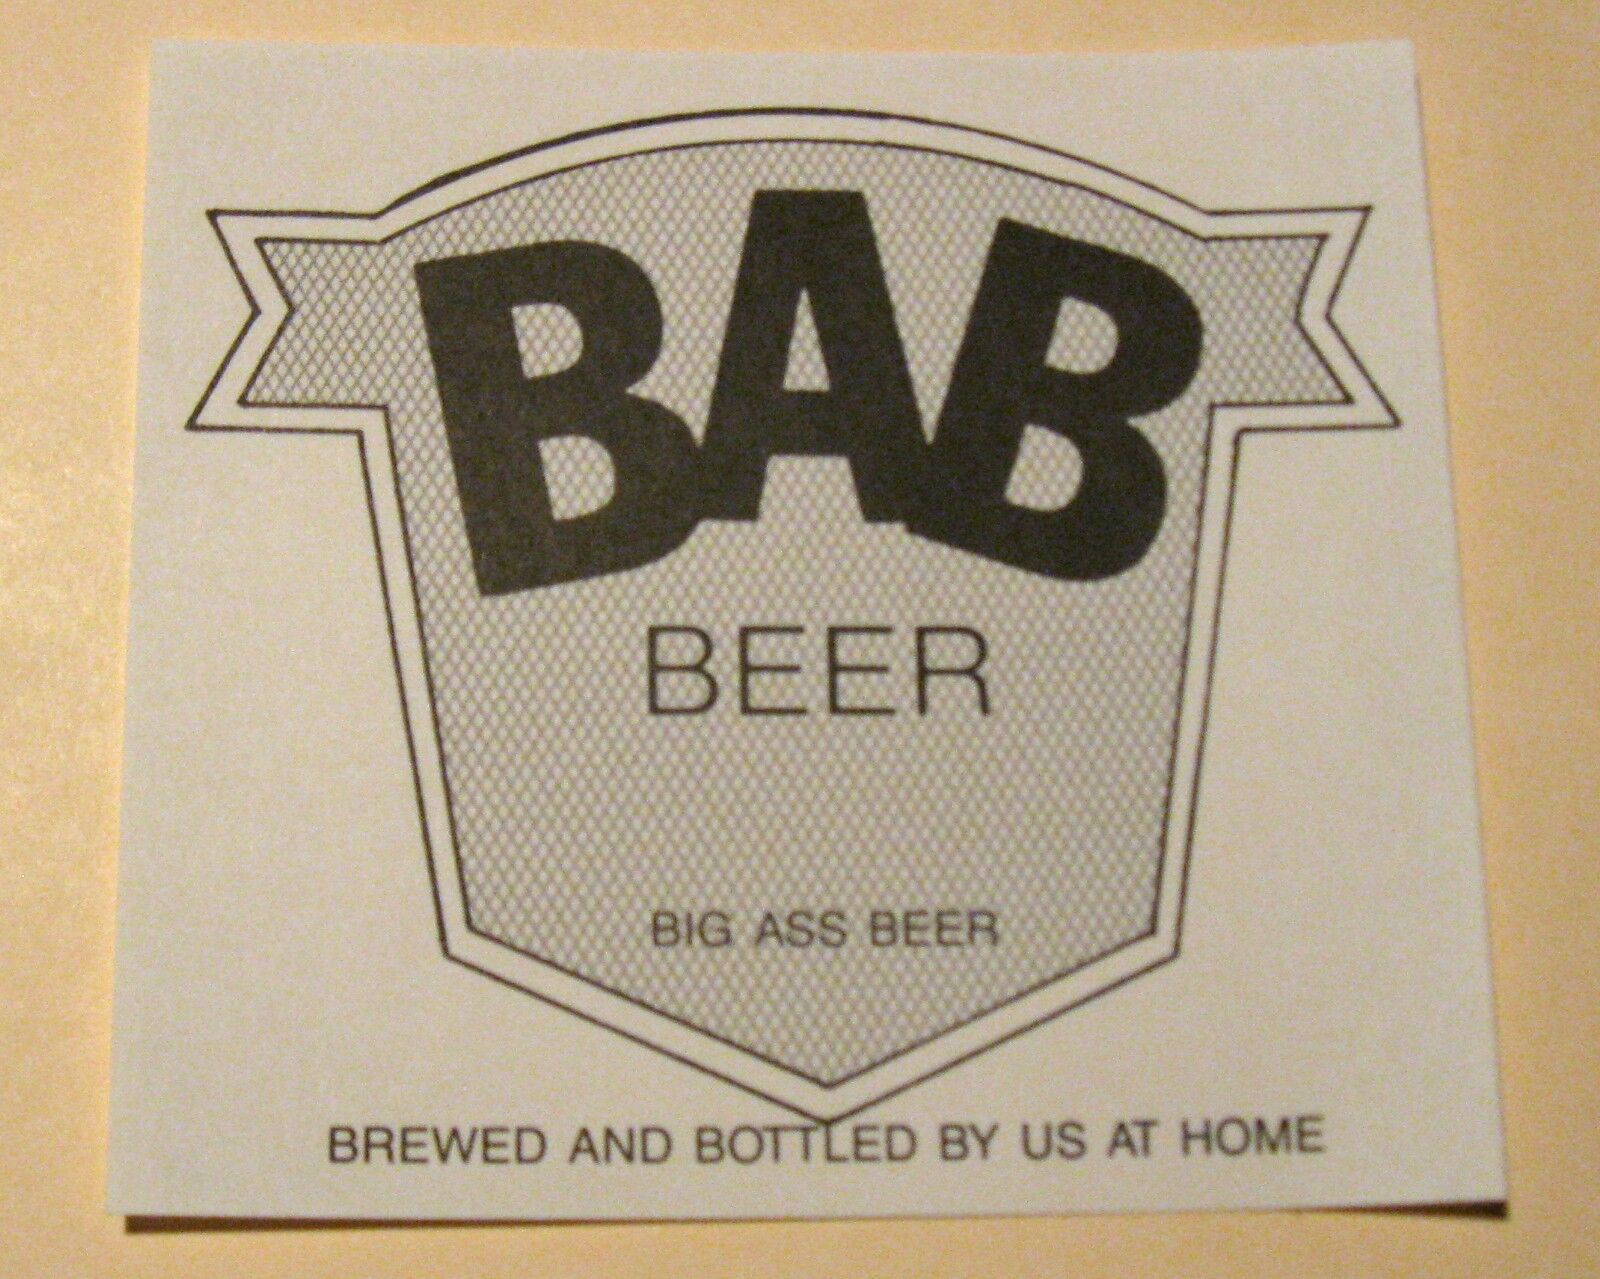 100 BEER LABELS - Need Some For Your BAD-ASS BEER Home Brewers? NEVER USED - NEW Без бренда